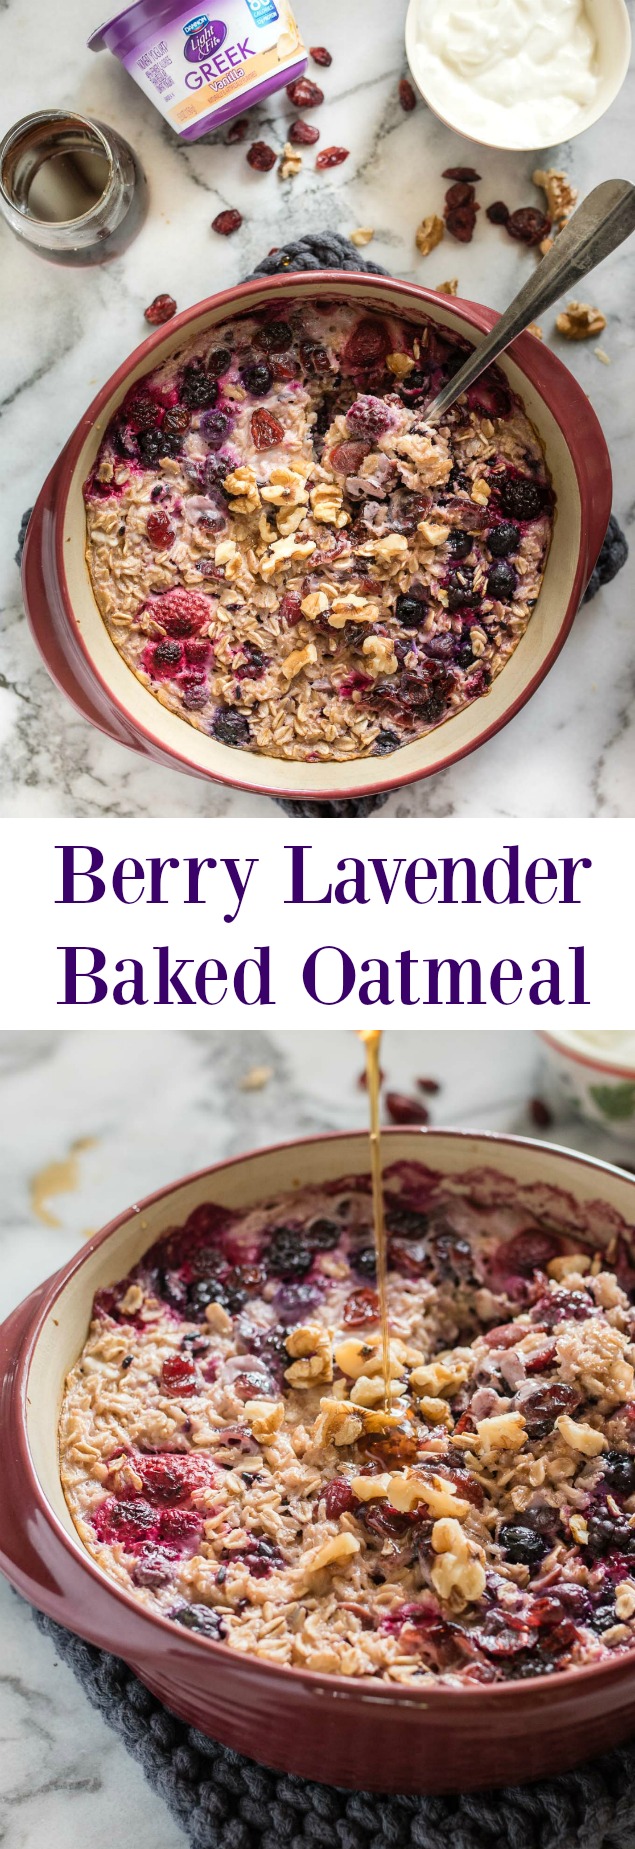 AD: Berry Lavender Baked Oatmeal is a simple, gluten-free nourishing breakfast to help you start your day off right. Using simple ingredients like oats, frozen berries and dried fruit, allows this healthy breakfast to come together so easily! Creamy vanilla nonfat yogurt binds it altogether and adds extra flavor. You’ll want to keep this in the breakfast rotation for sure!